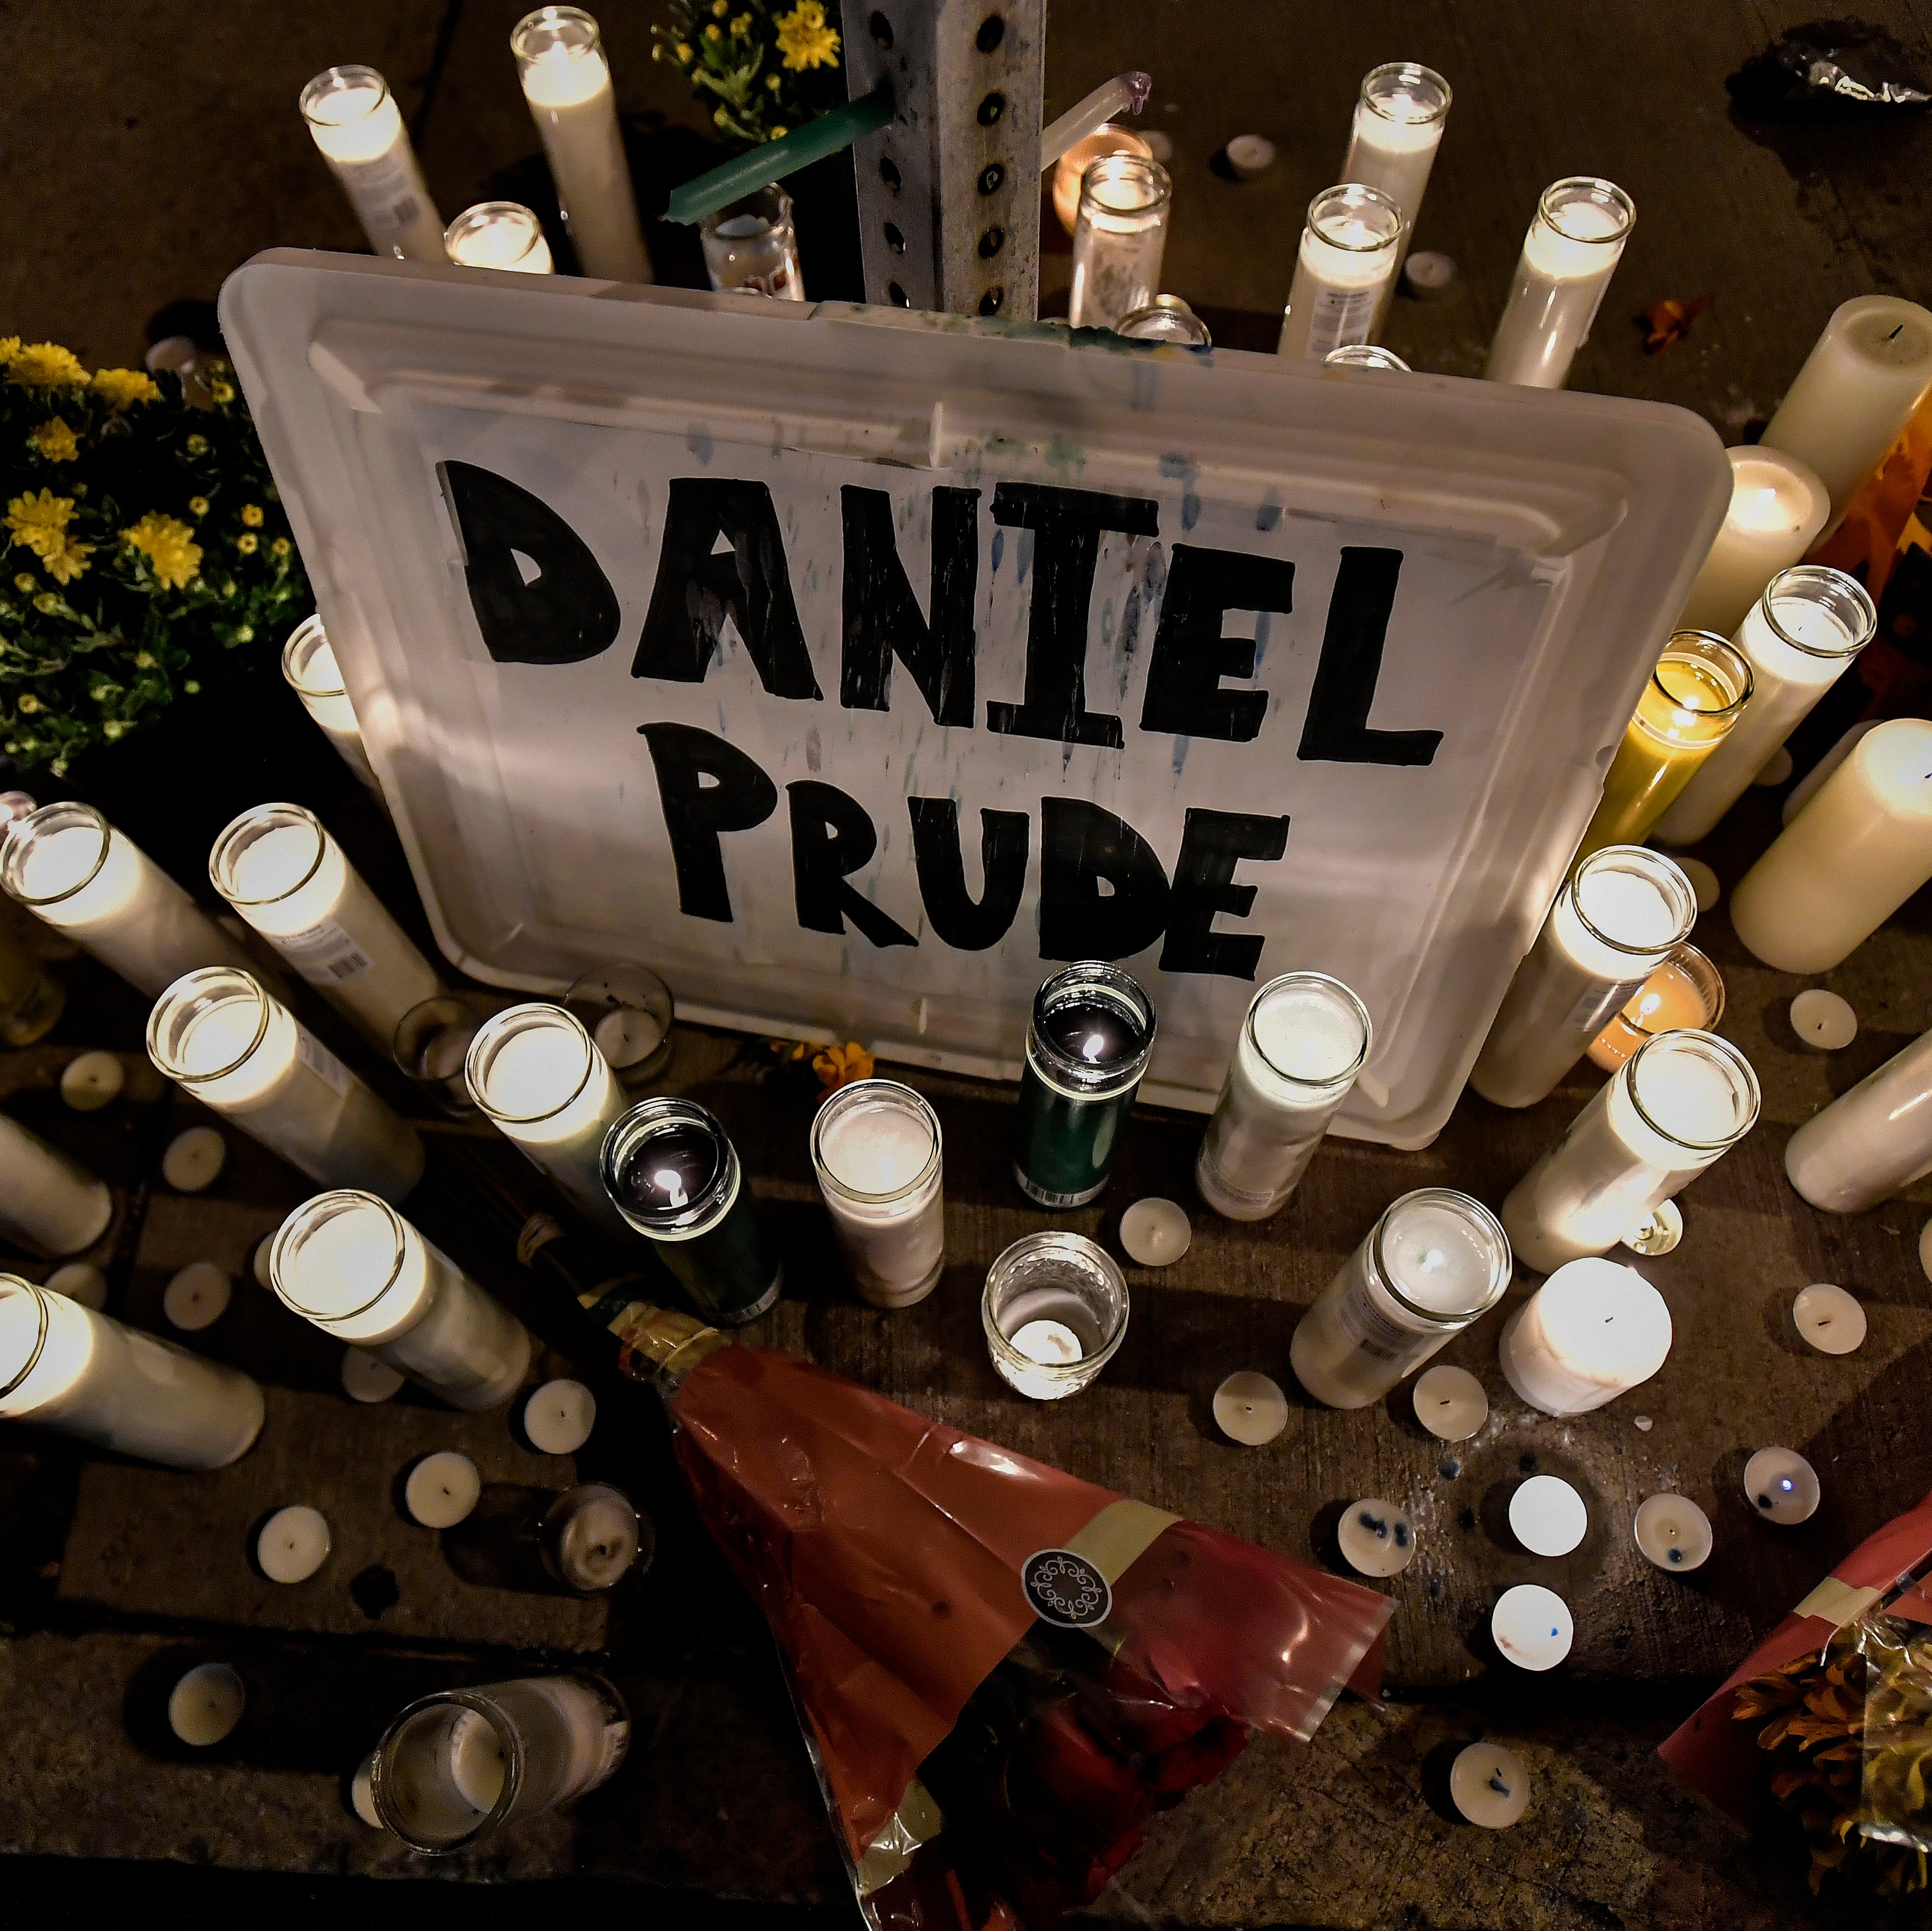 A makeshift memorial is seen in Rochester, N.Y., near the site where Daniel Prude was restrained by police officers.